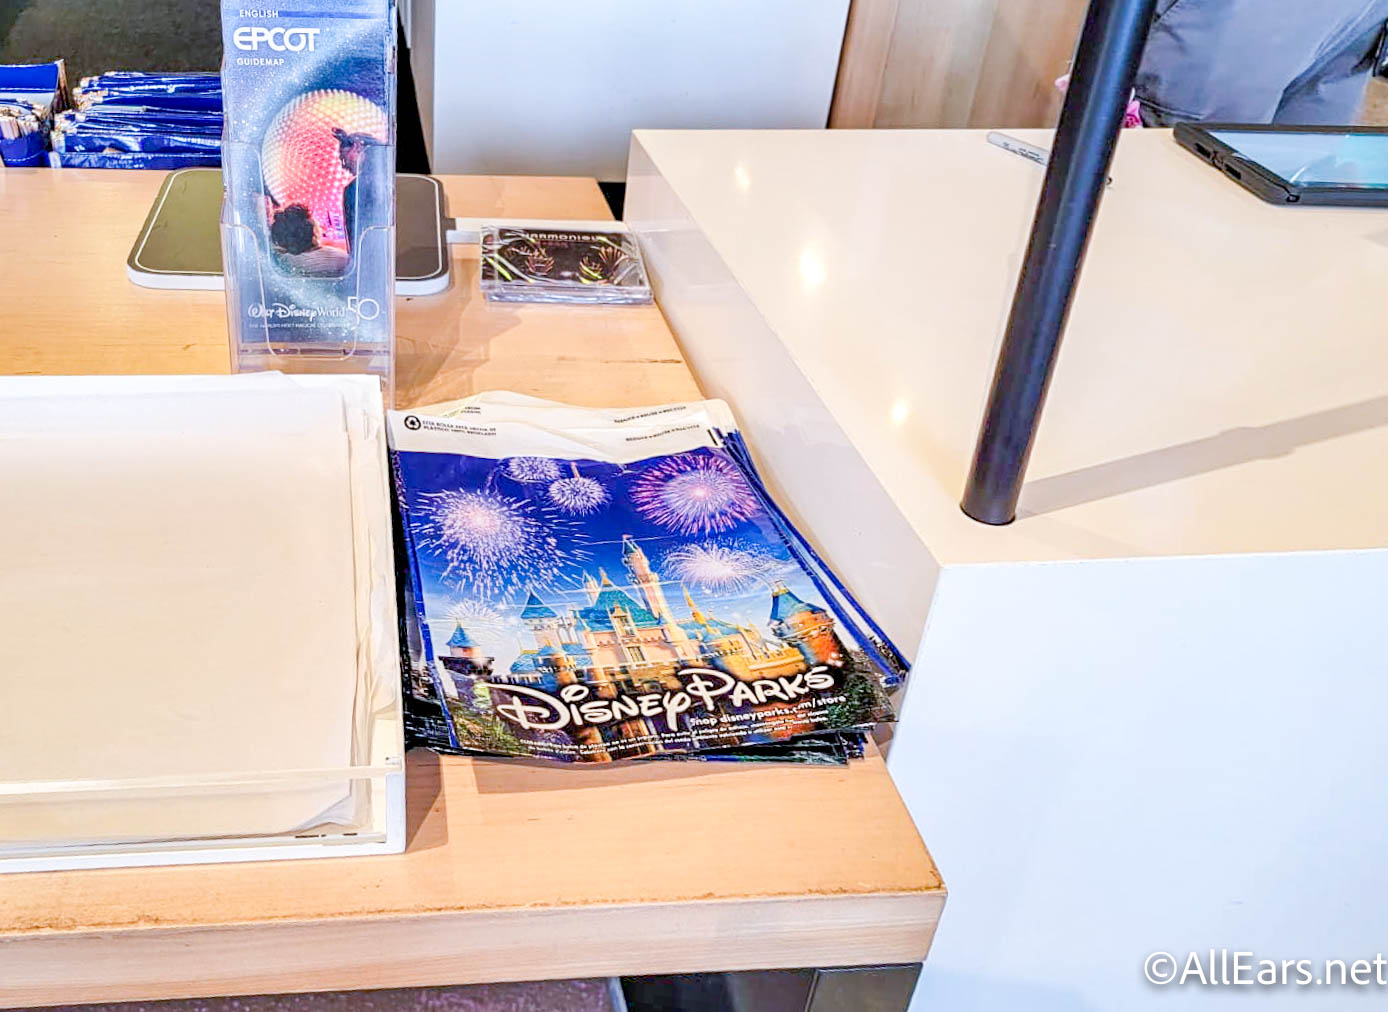 UPDATE: Walt Disney World Slowly Phasing Out Complimentary Plastic